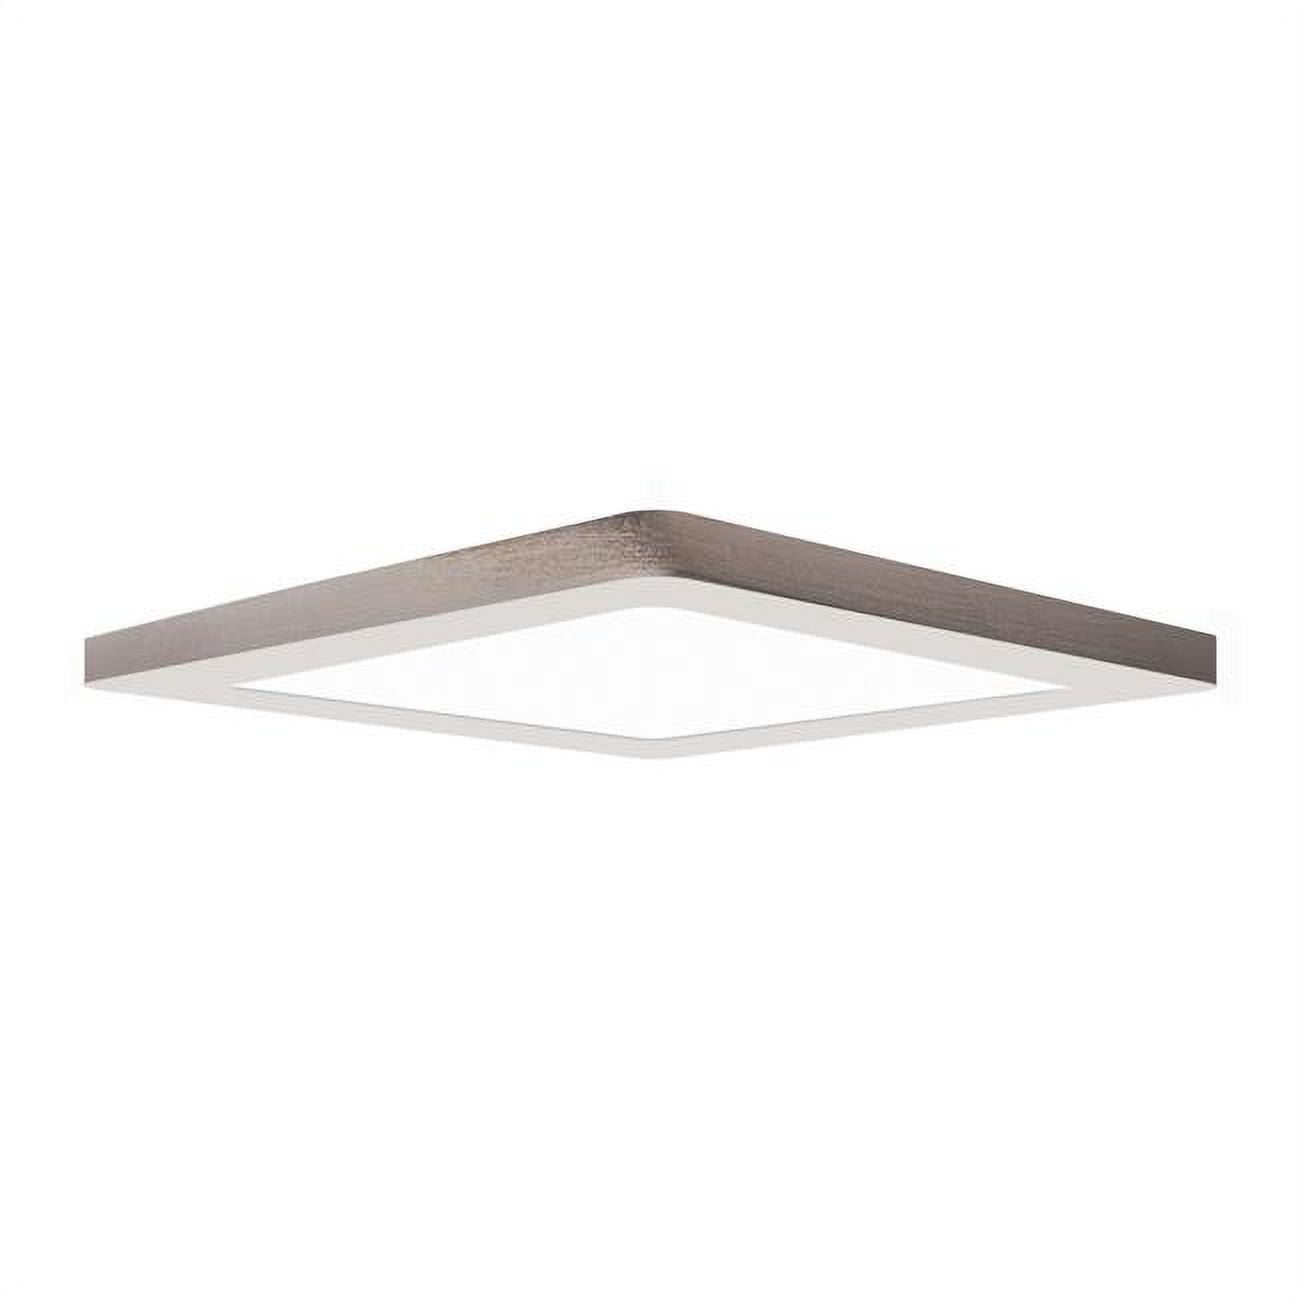 Picture of Access Lighting 20835TRIM-BS 12 in. ModPLUS Brushed Steel Trim Recessed for 20835 & 20841